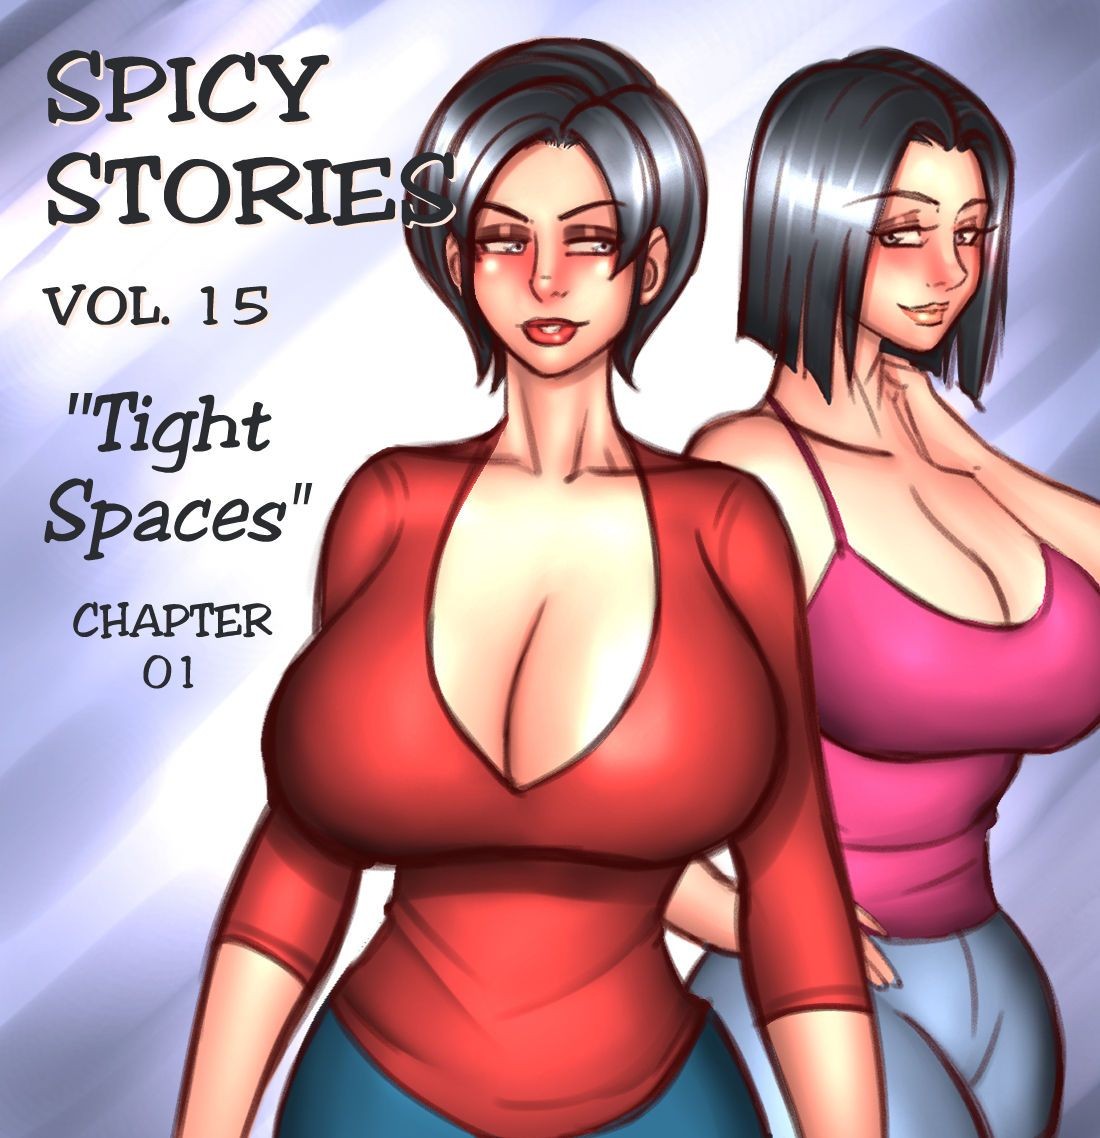 Rough Porn NGT Spicy Stories 15 - Tight Spaces (Ongoing) NGT Spicy Stories 15 - Tight Spaces (Ongoing) Bizarre